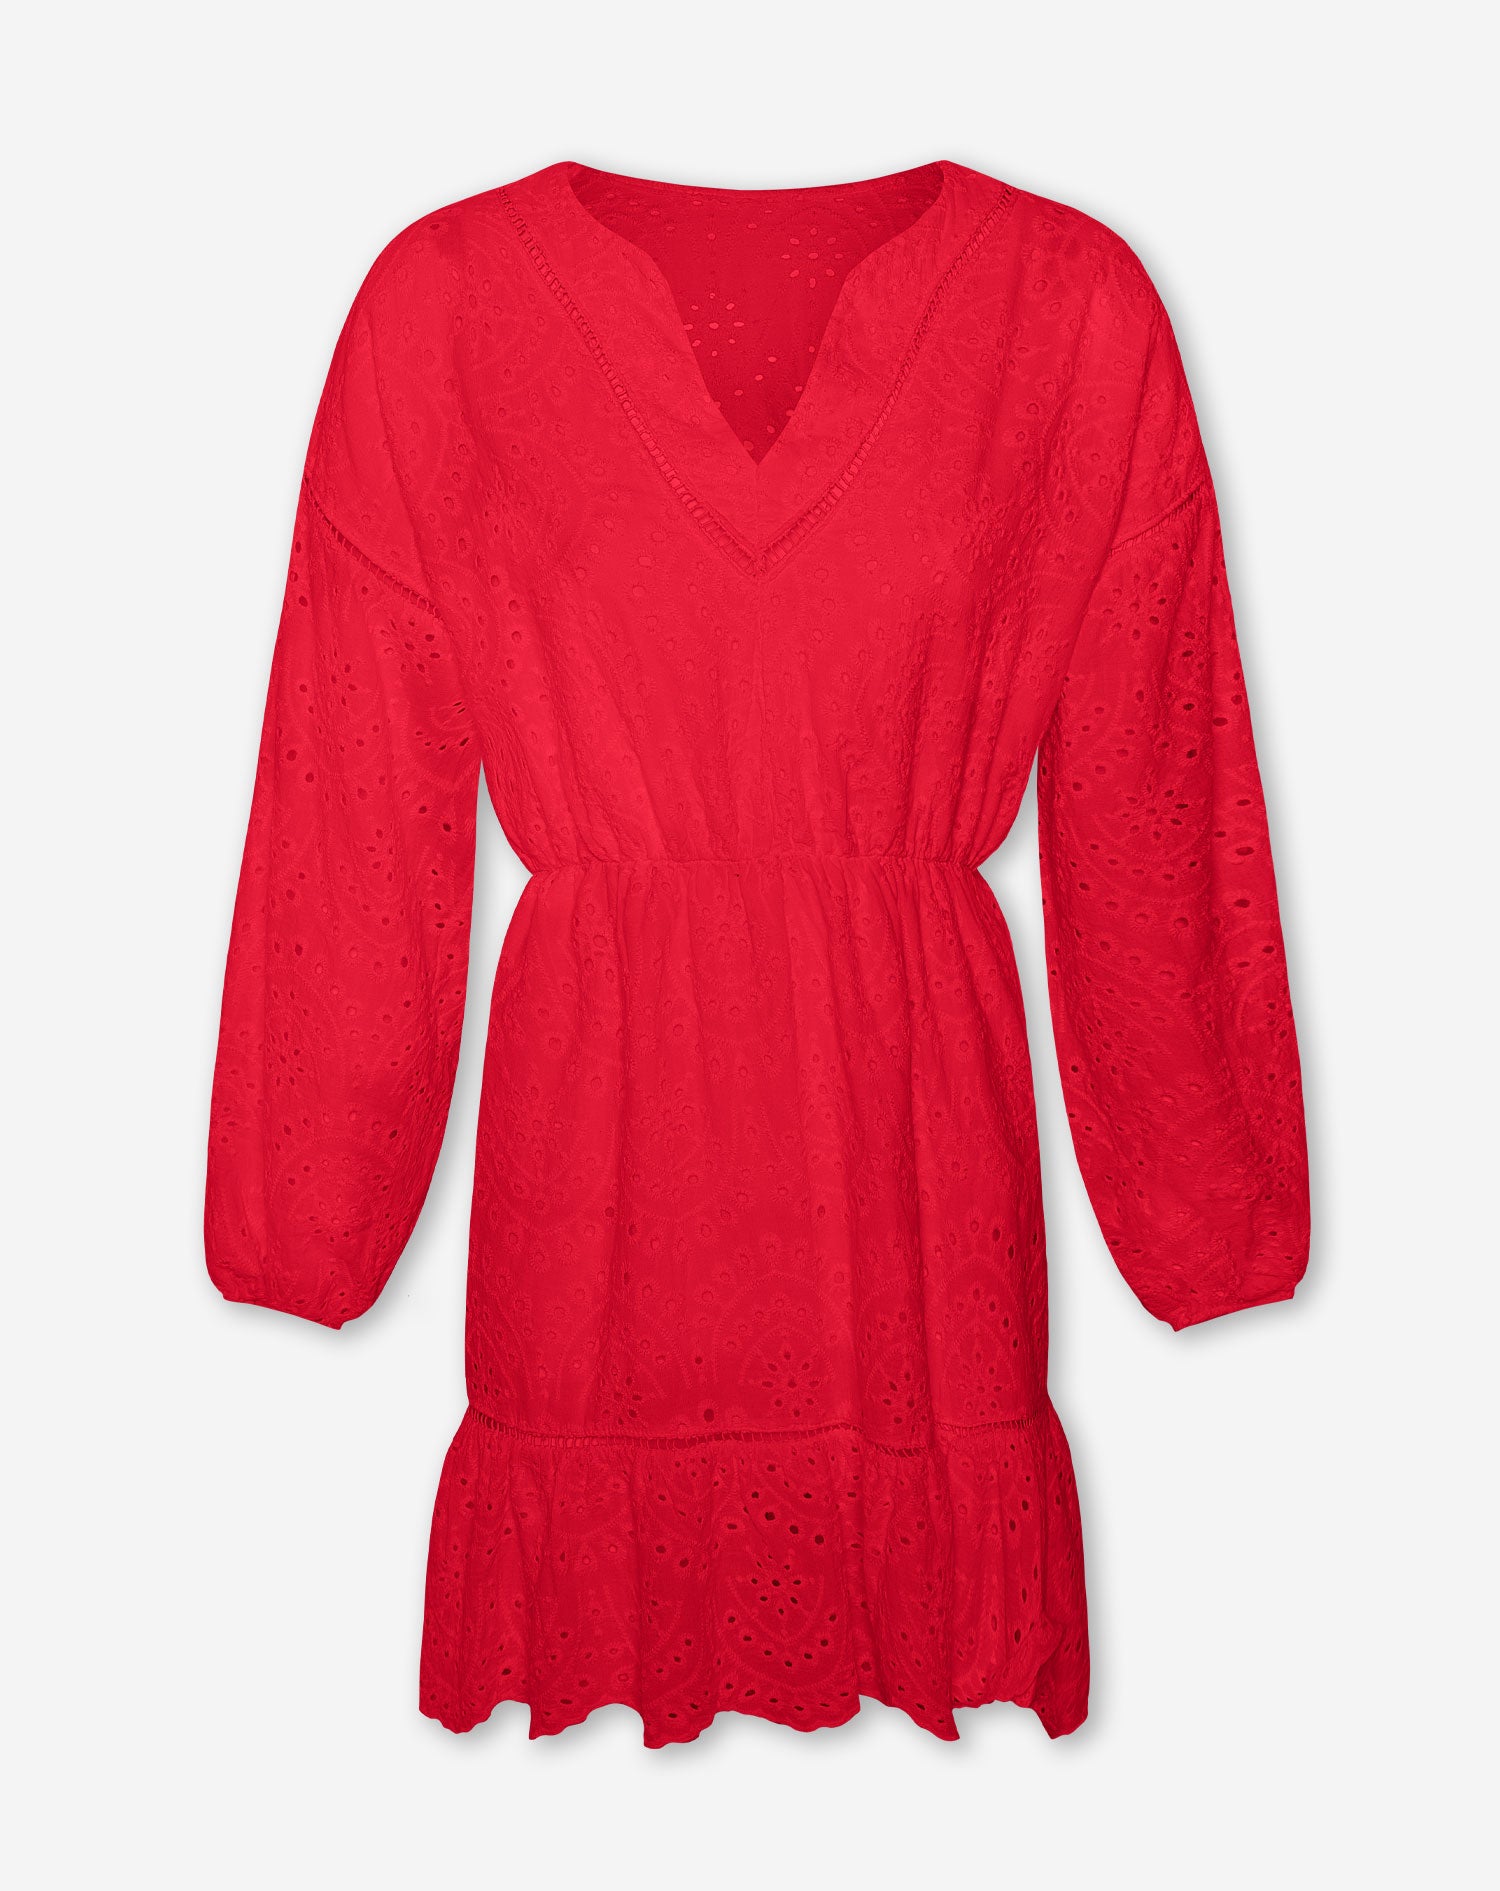 LOUISE BRODERIE DRESS RED